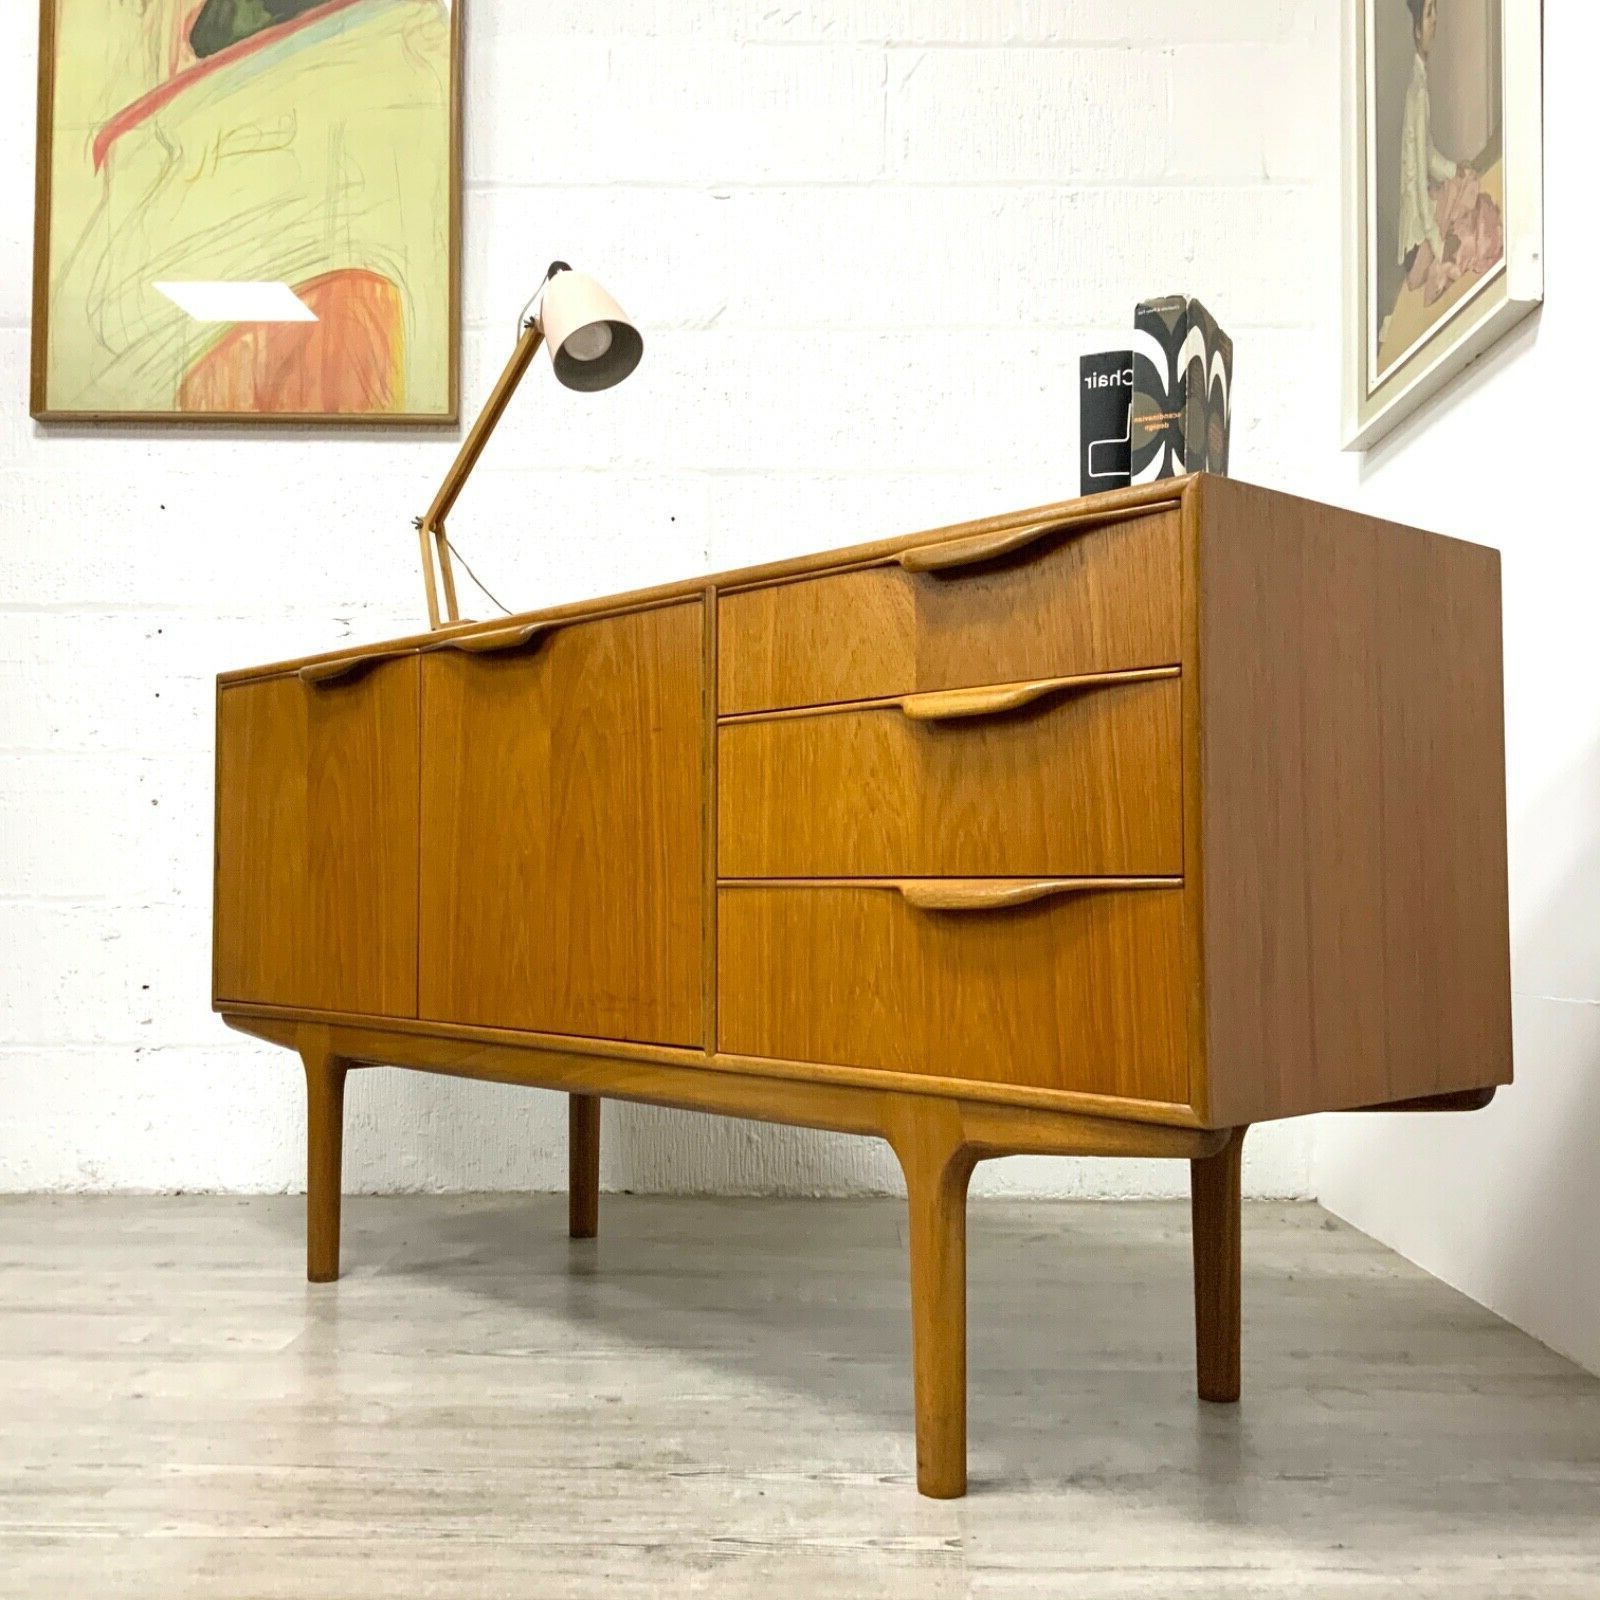 Mid Century Modern Sideboards For Sale | Vinterior In Mid Century Modern Sideboards (View 16 of 20)